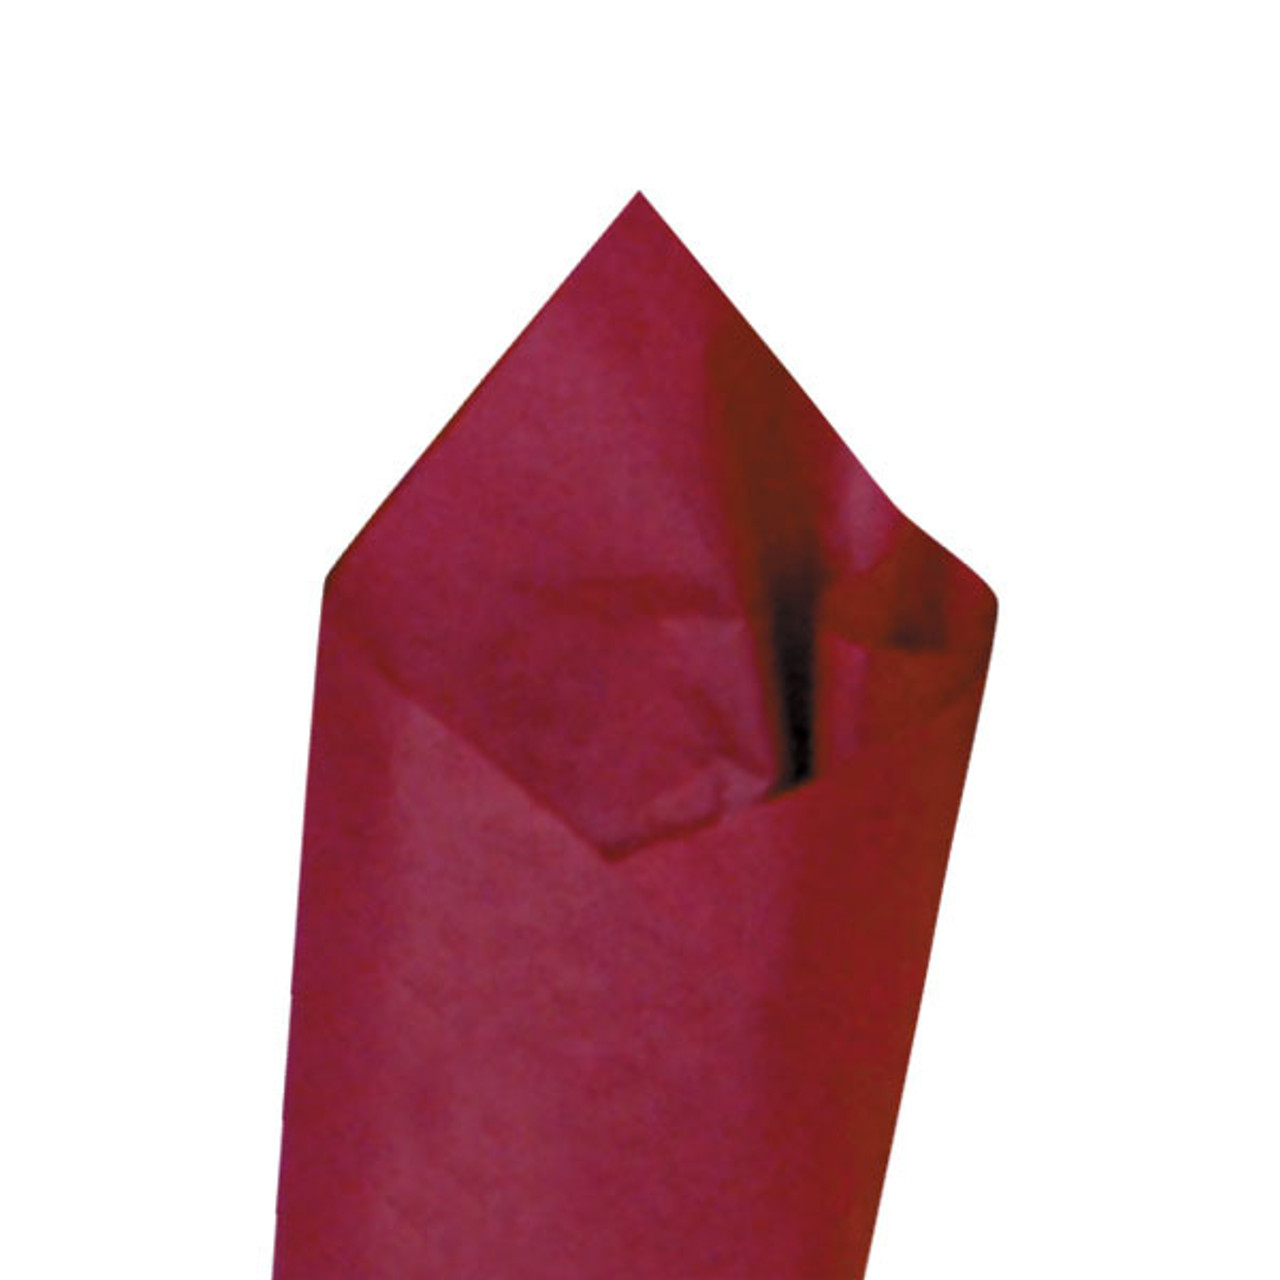 Claret (Dark Red/Maroon) Color Tissue Paper 20 x 30 24 Sheets / Pack